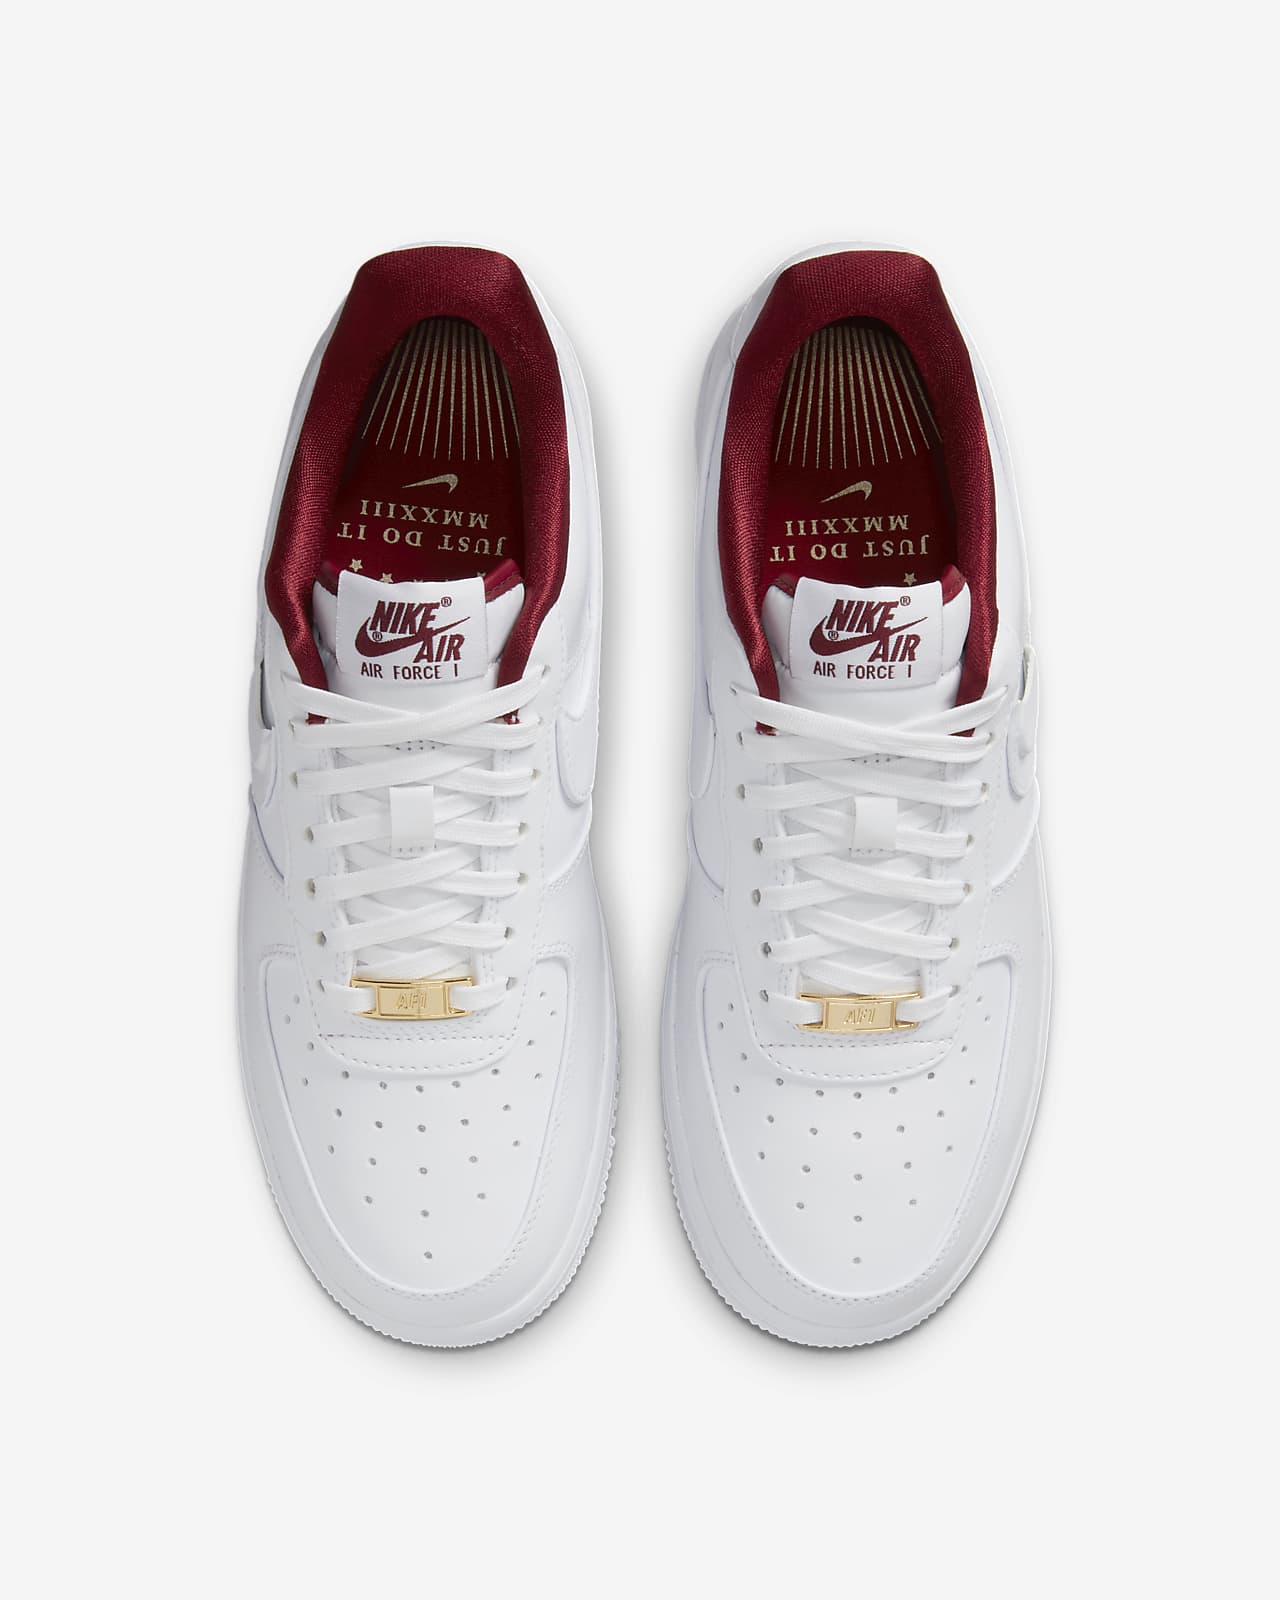 Nike Air Force 1 '07 SE Women's Shoes